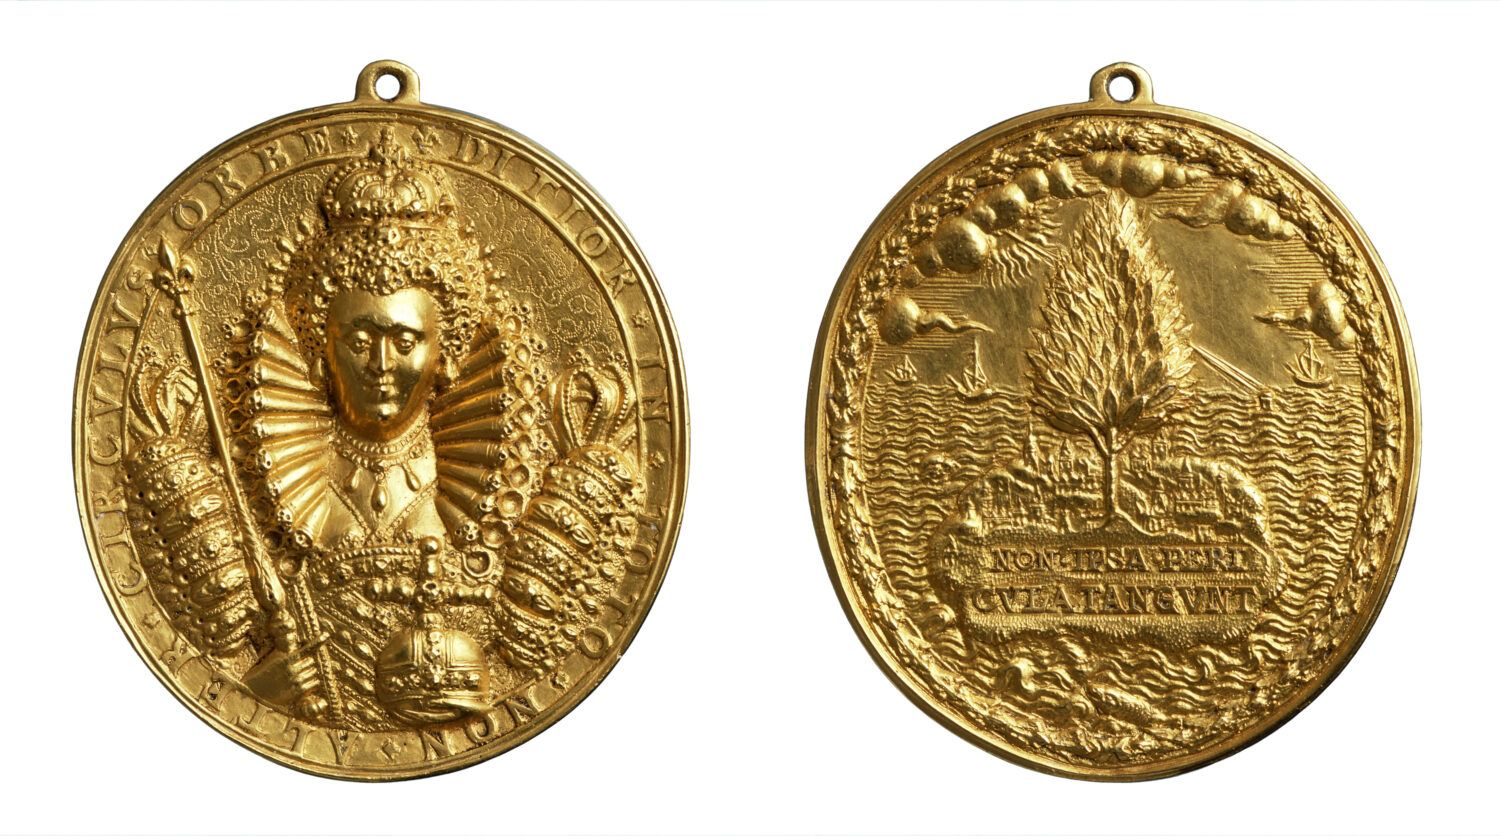 Both sides of a gold medal. One side shows Queen Elizabeth I and the other shows an island in a storm with a large tree protecting it.